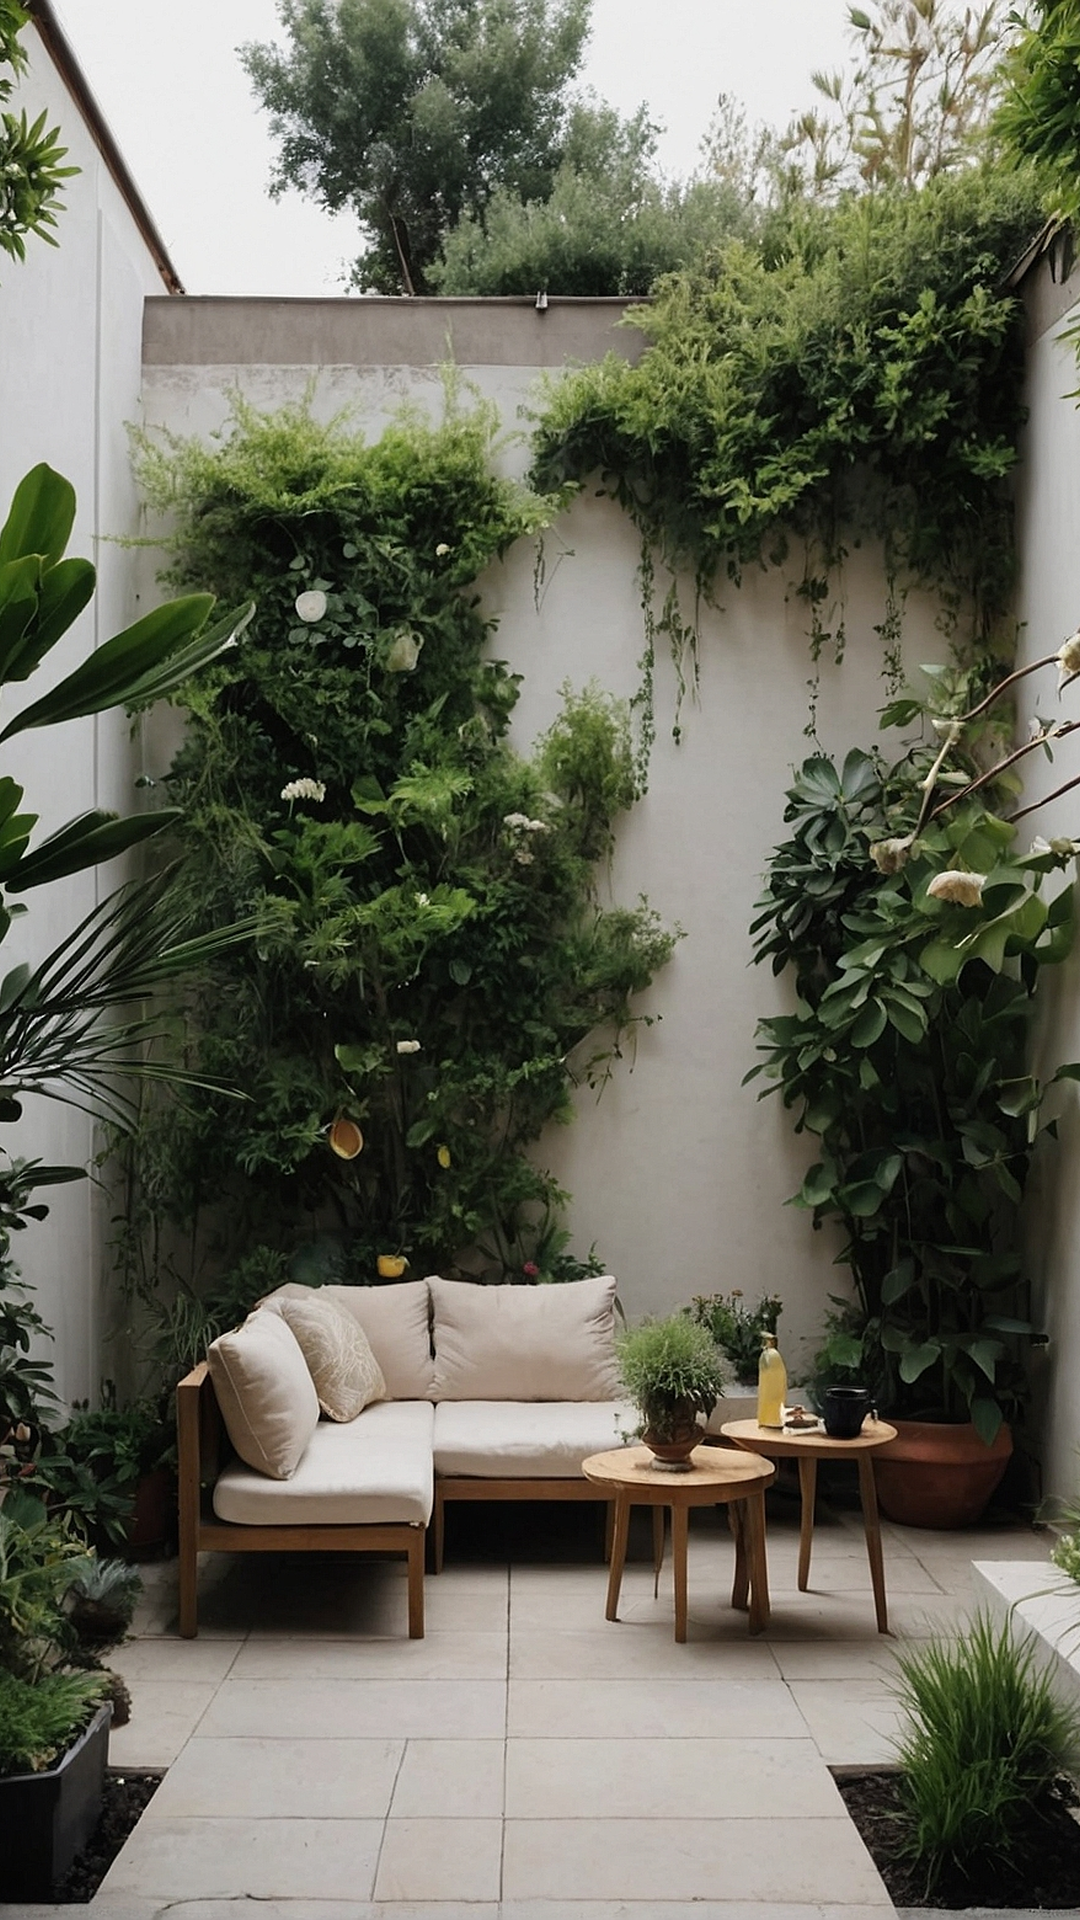 Efficient Use of Space: Inspiring Small Garden Layouts